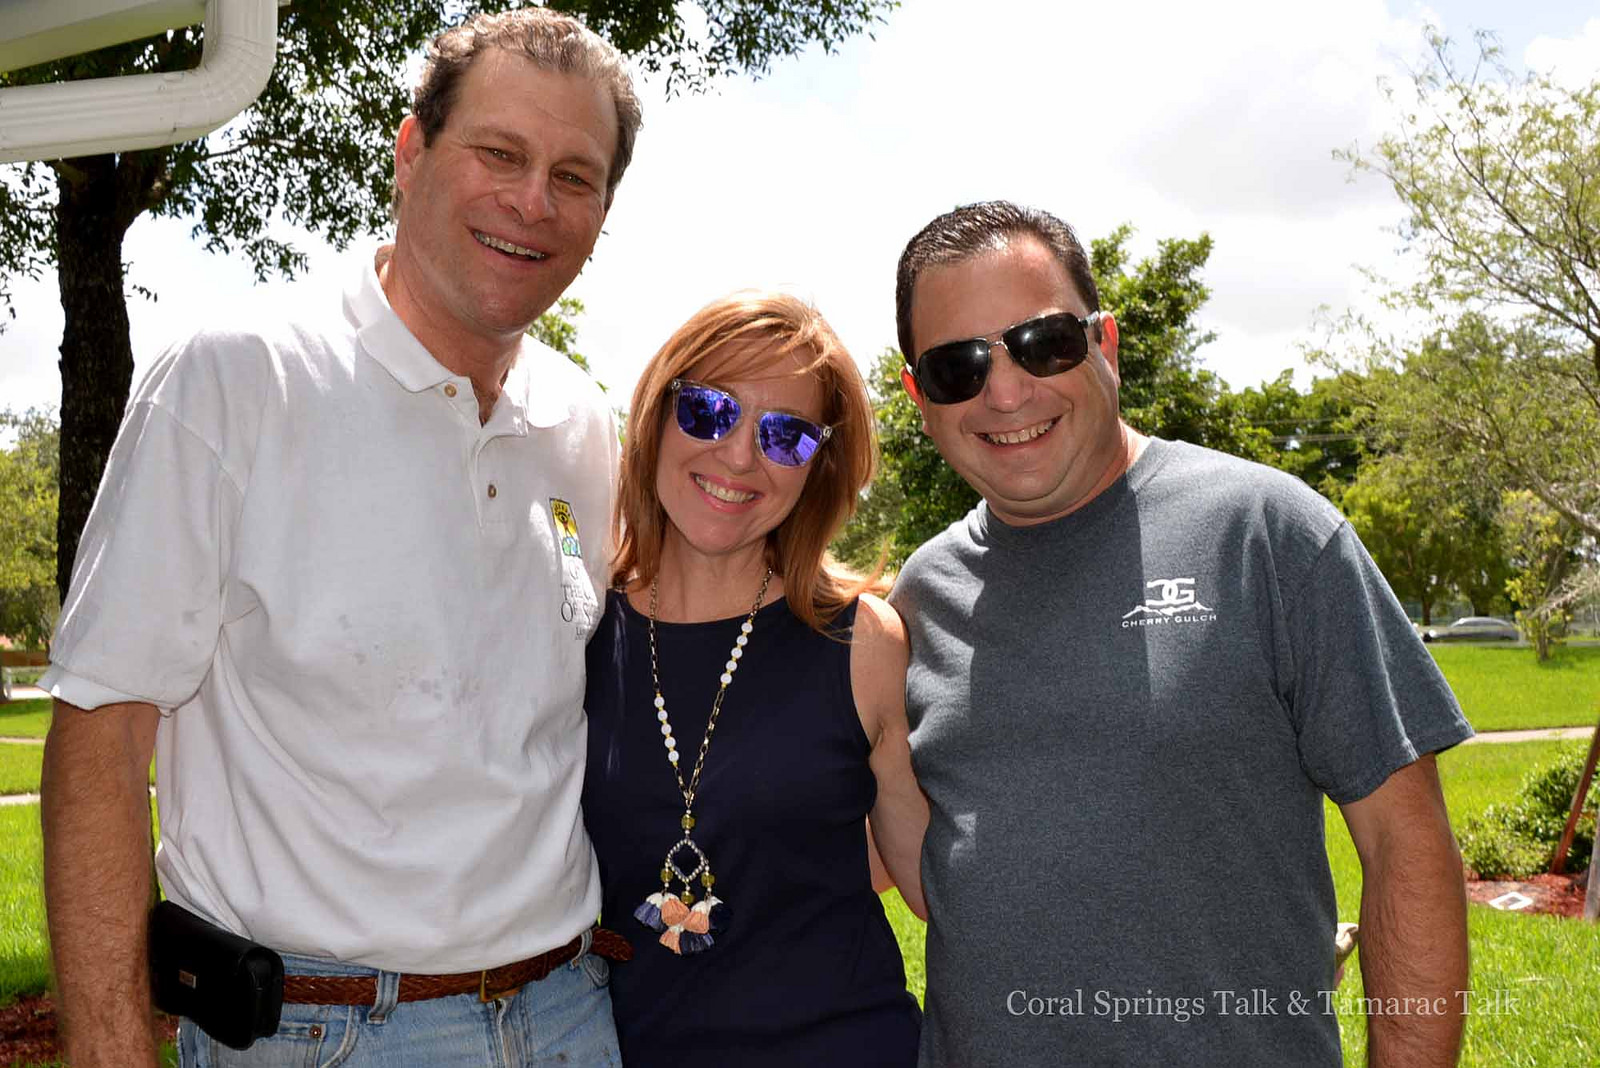 Mitch Ceasar along with Florida State Representative Kristin Jacobs and State Senator Jeremy Ring